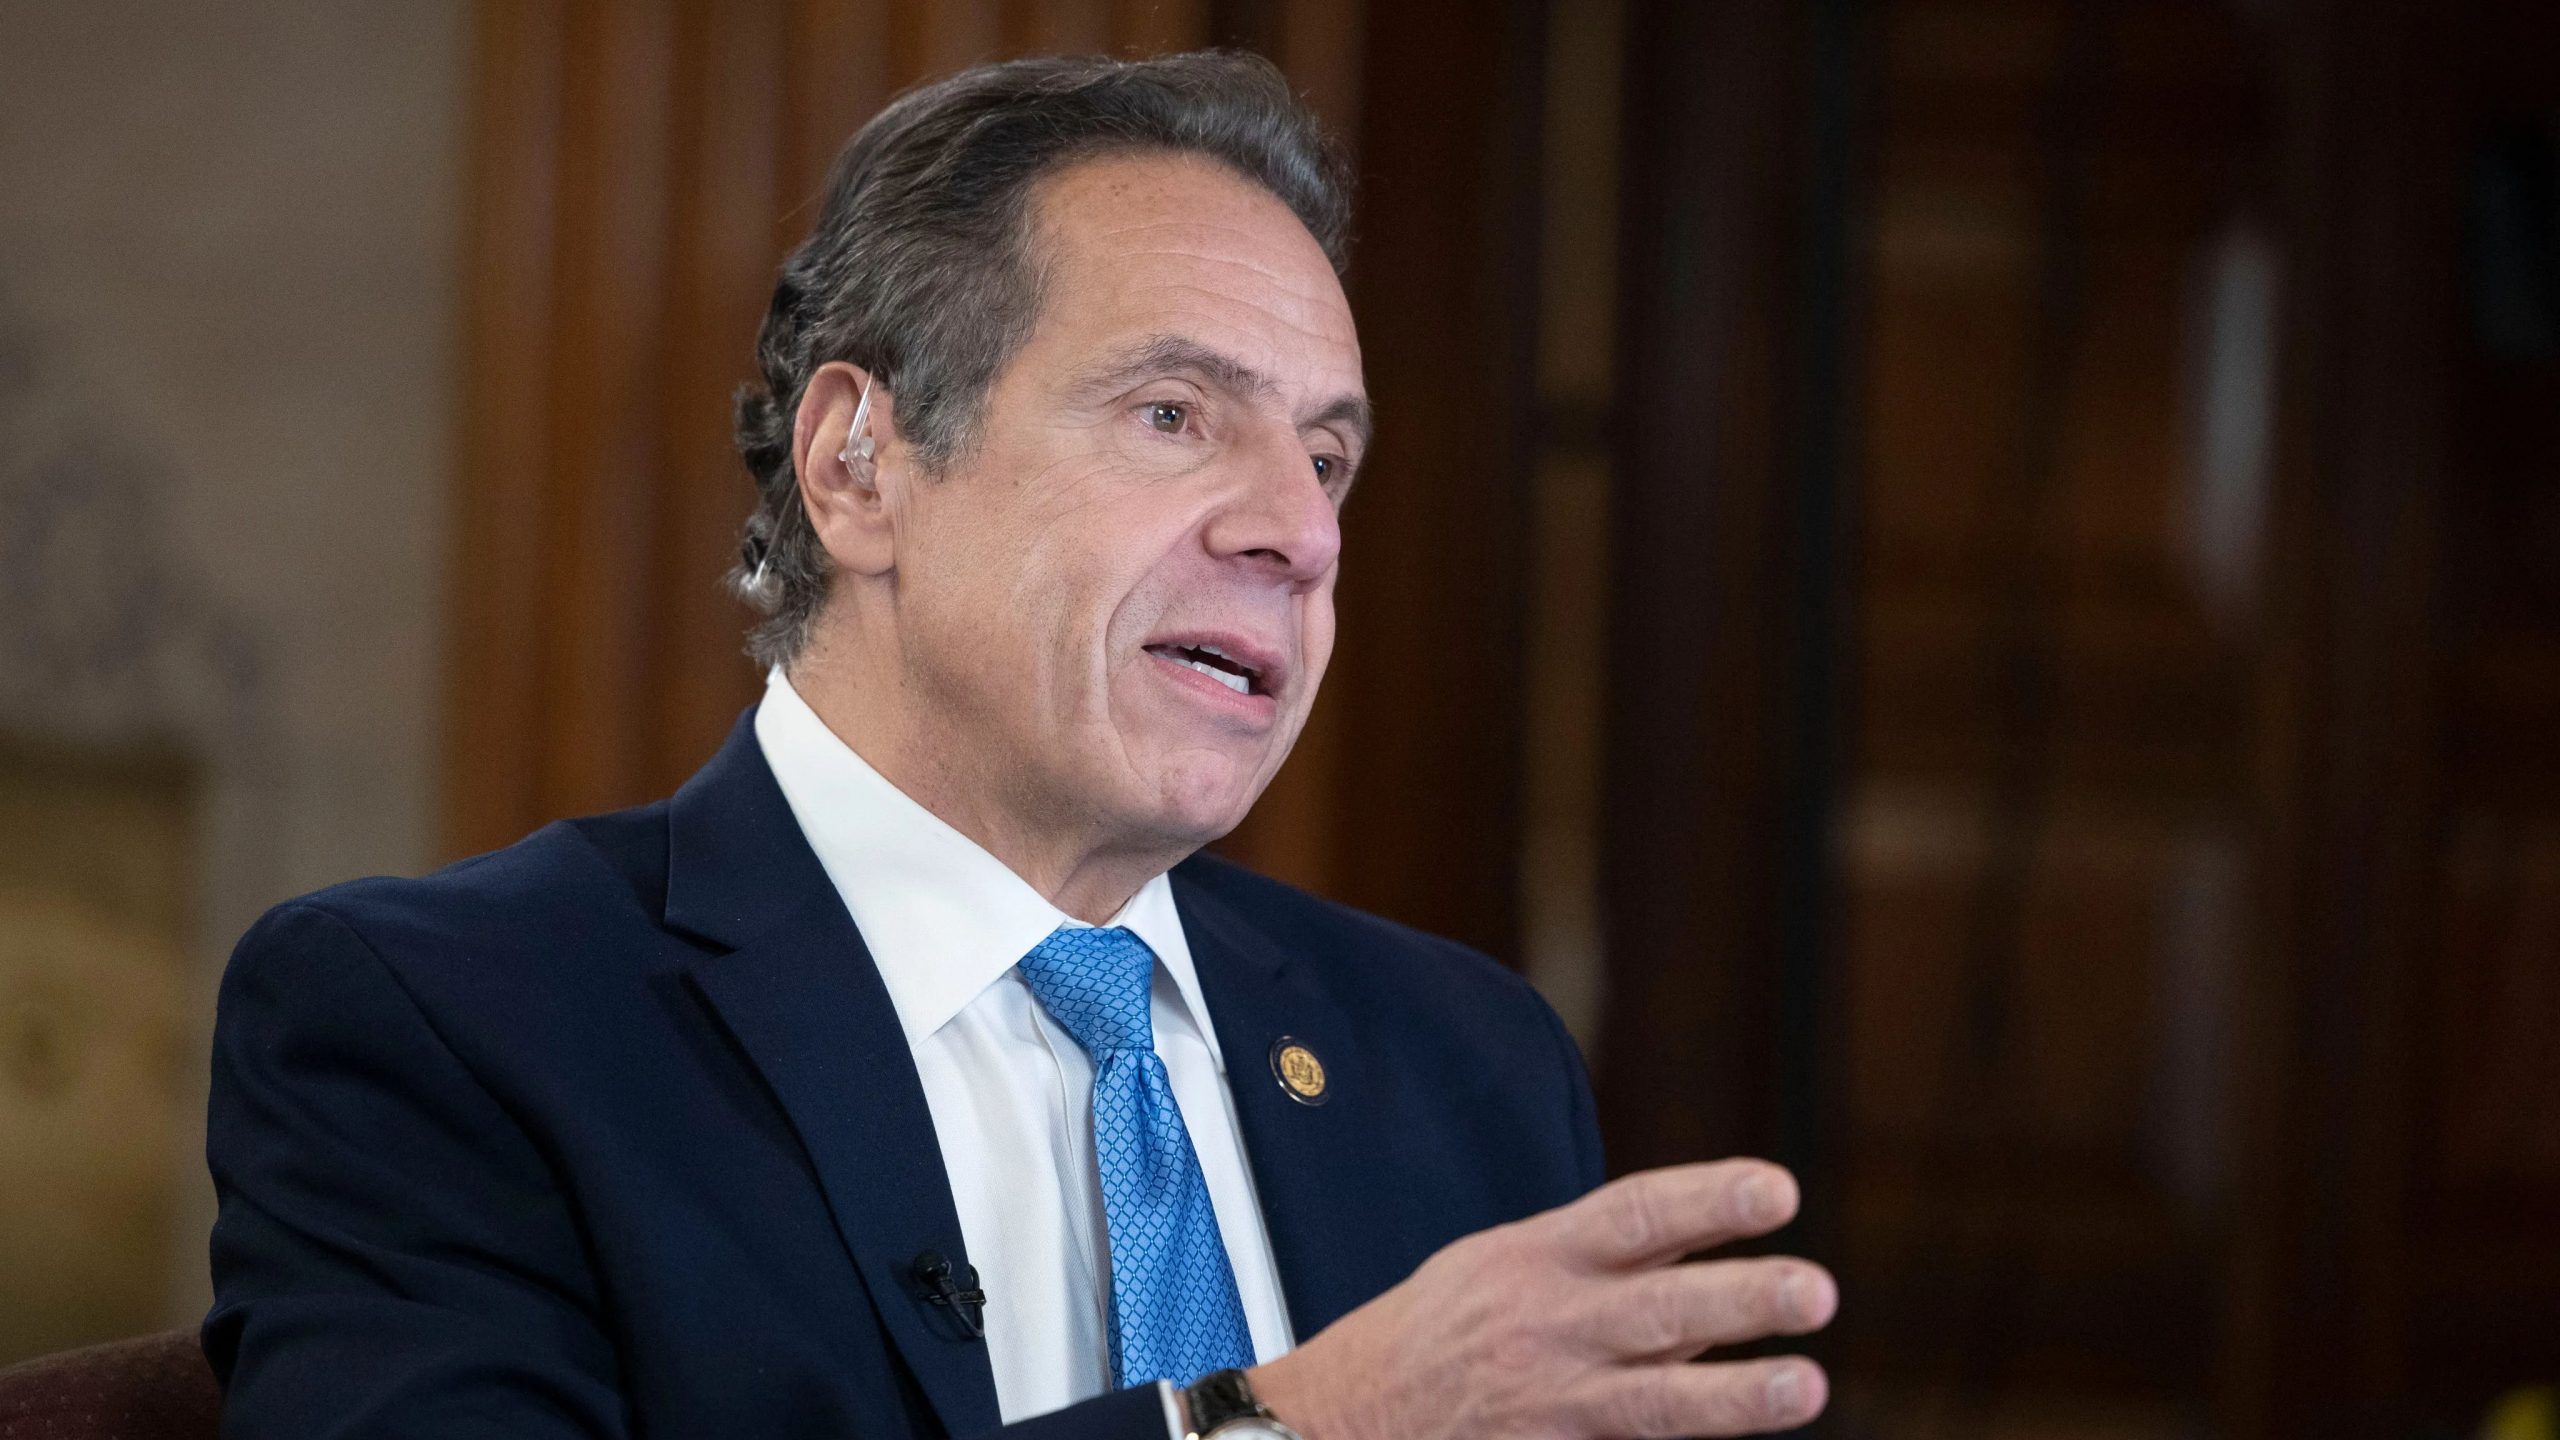 #MeToo Take 2? Movements strength hailed amid Andrew Cuomo fallout